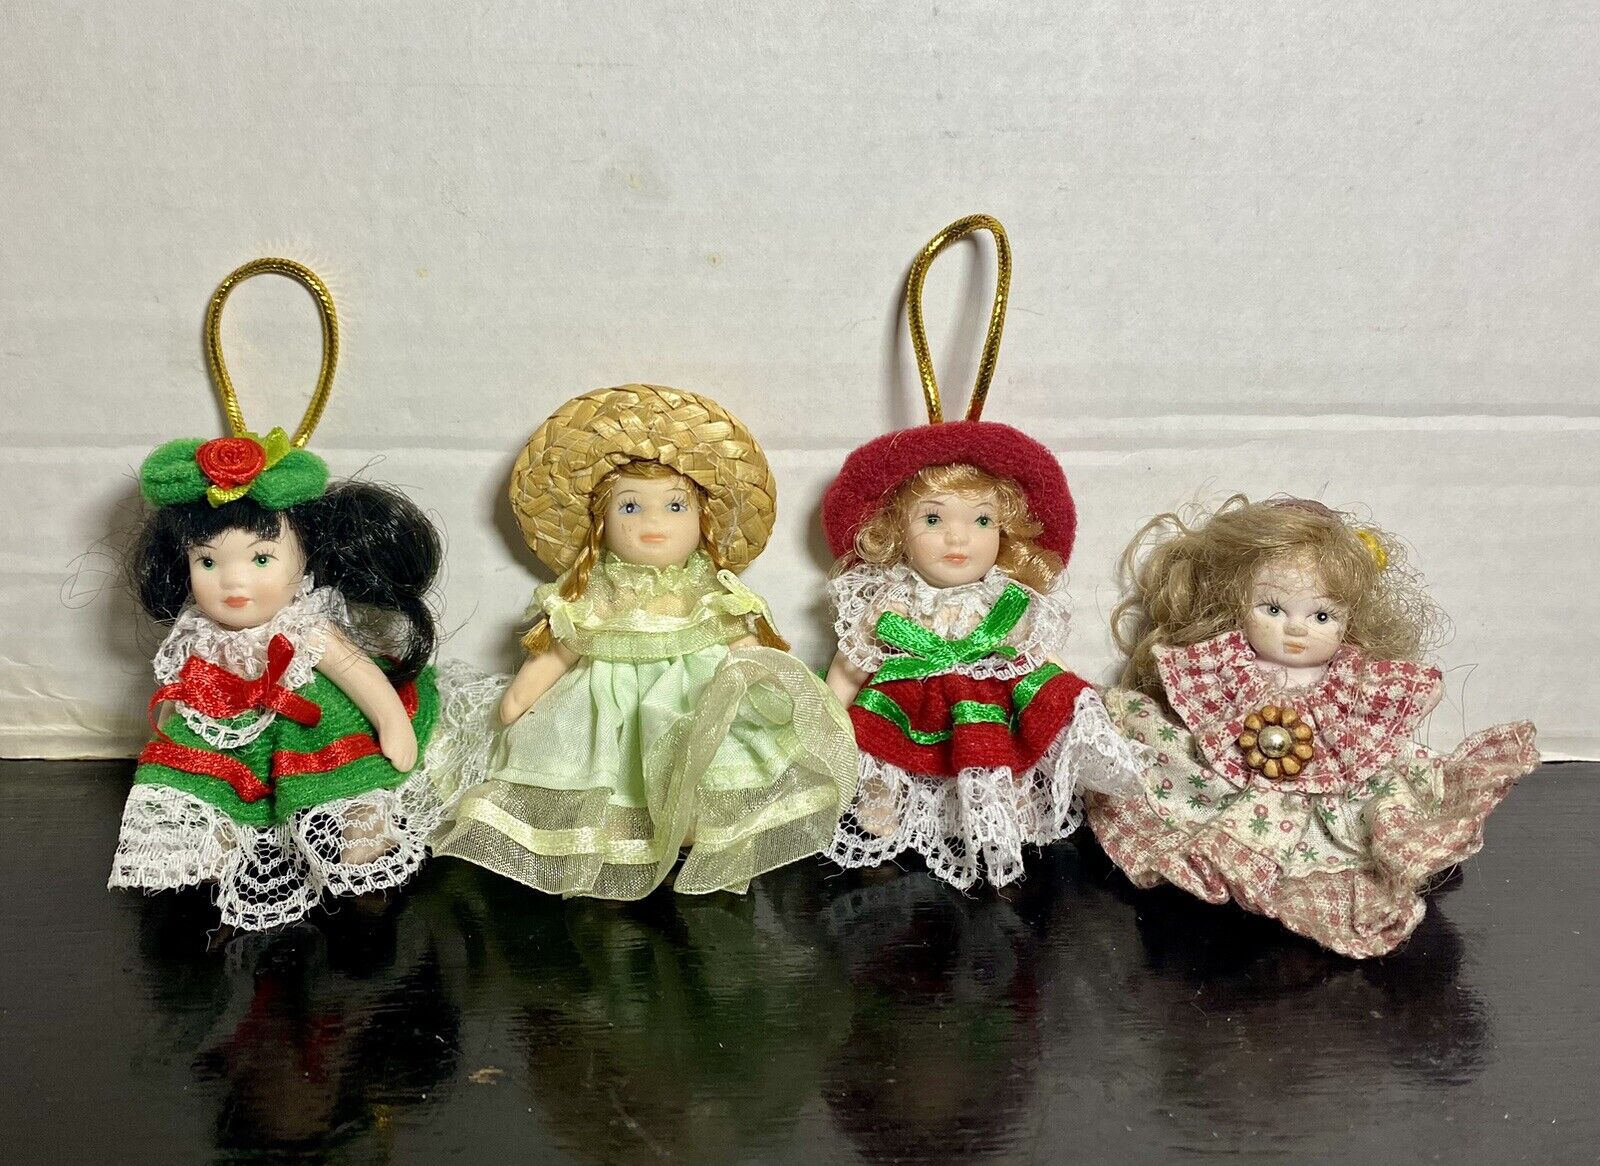 Lot Of 4 Porcelain Doll Ornaments Full Porcelain Bodies Jointed Movable Limbs 3”